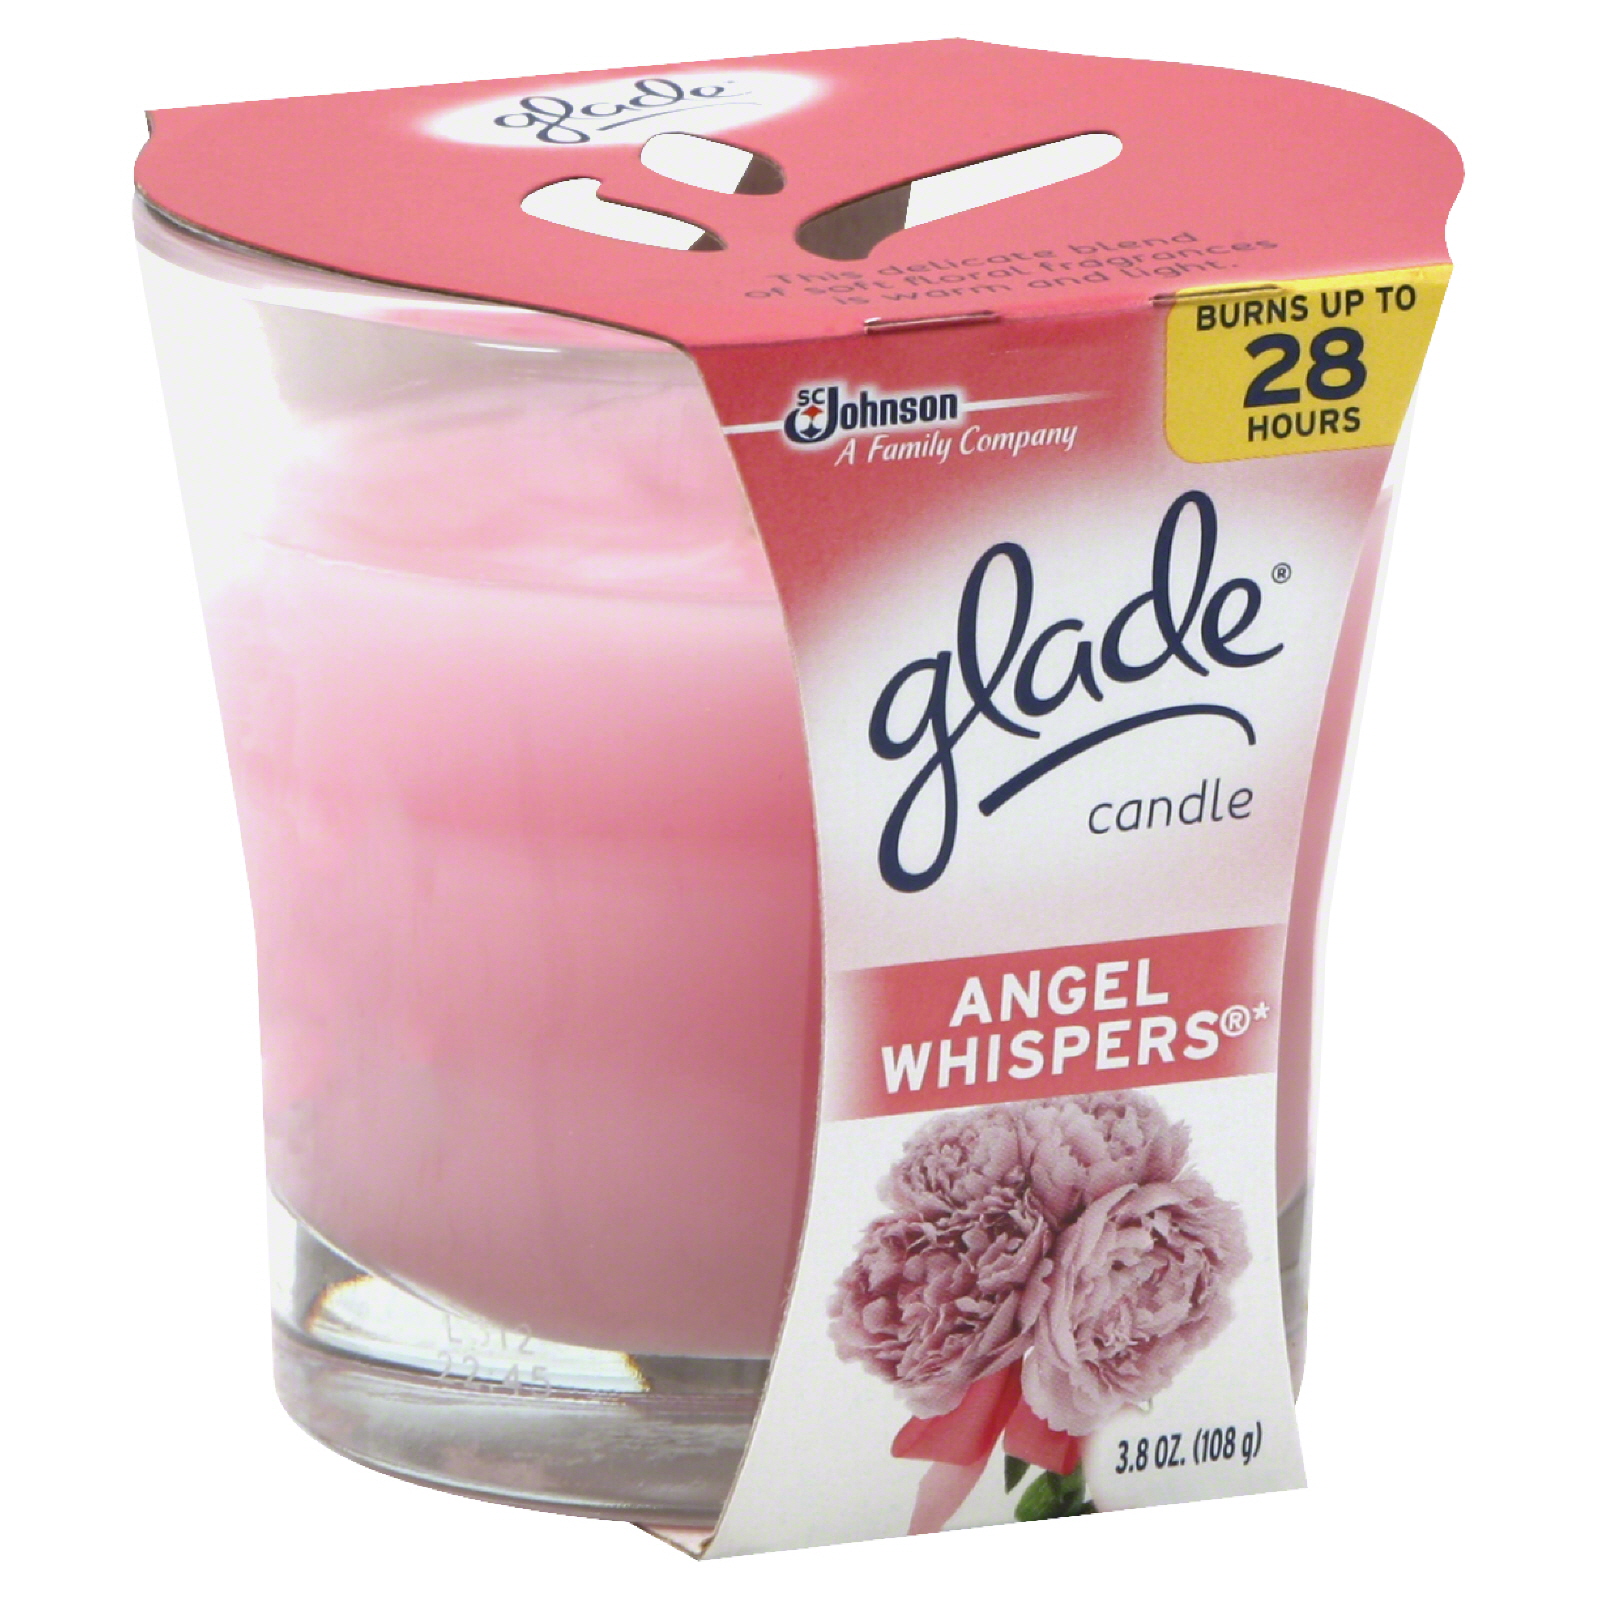 Glade Candle Angel Whispers Scent Jar 3.8 oz